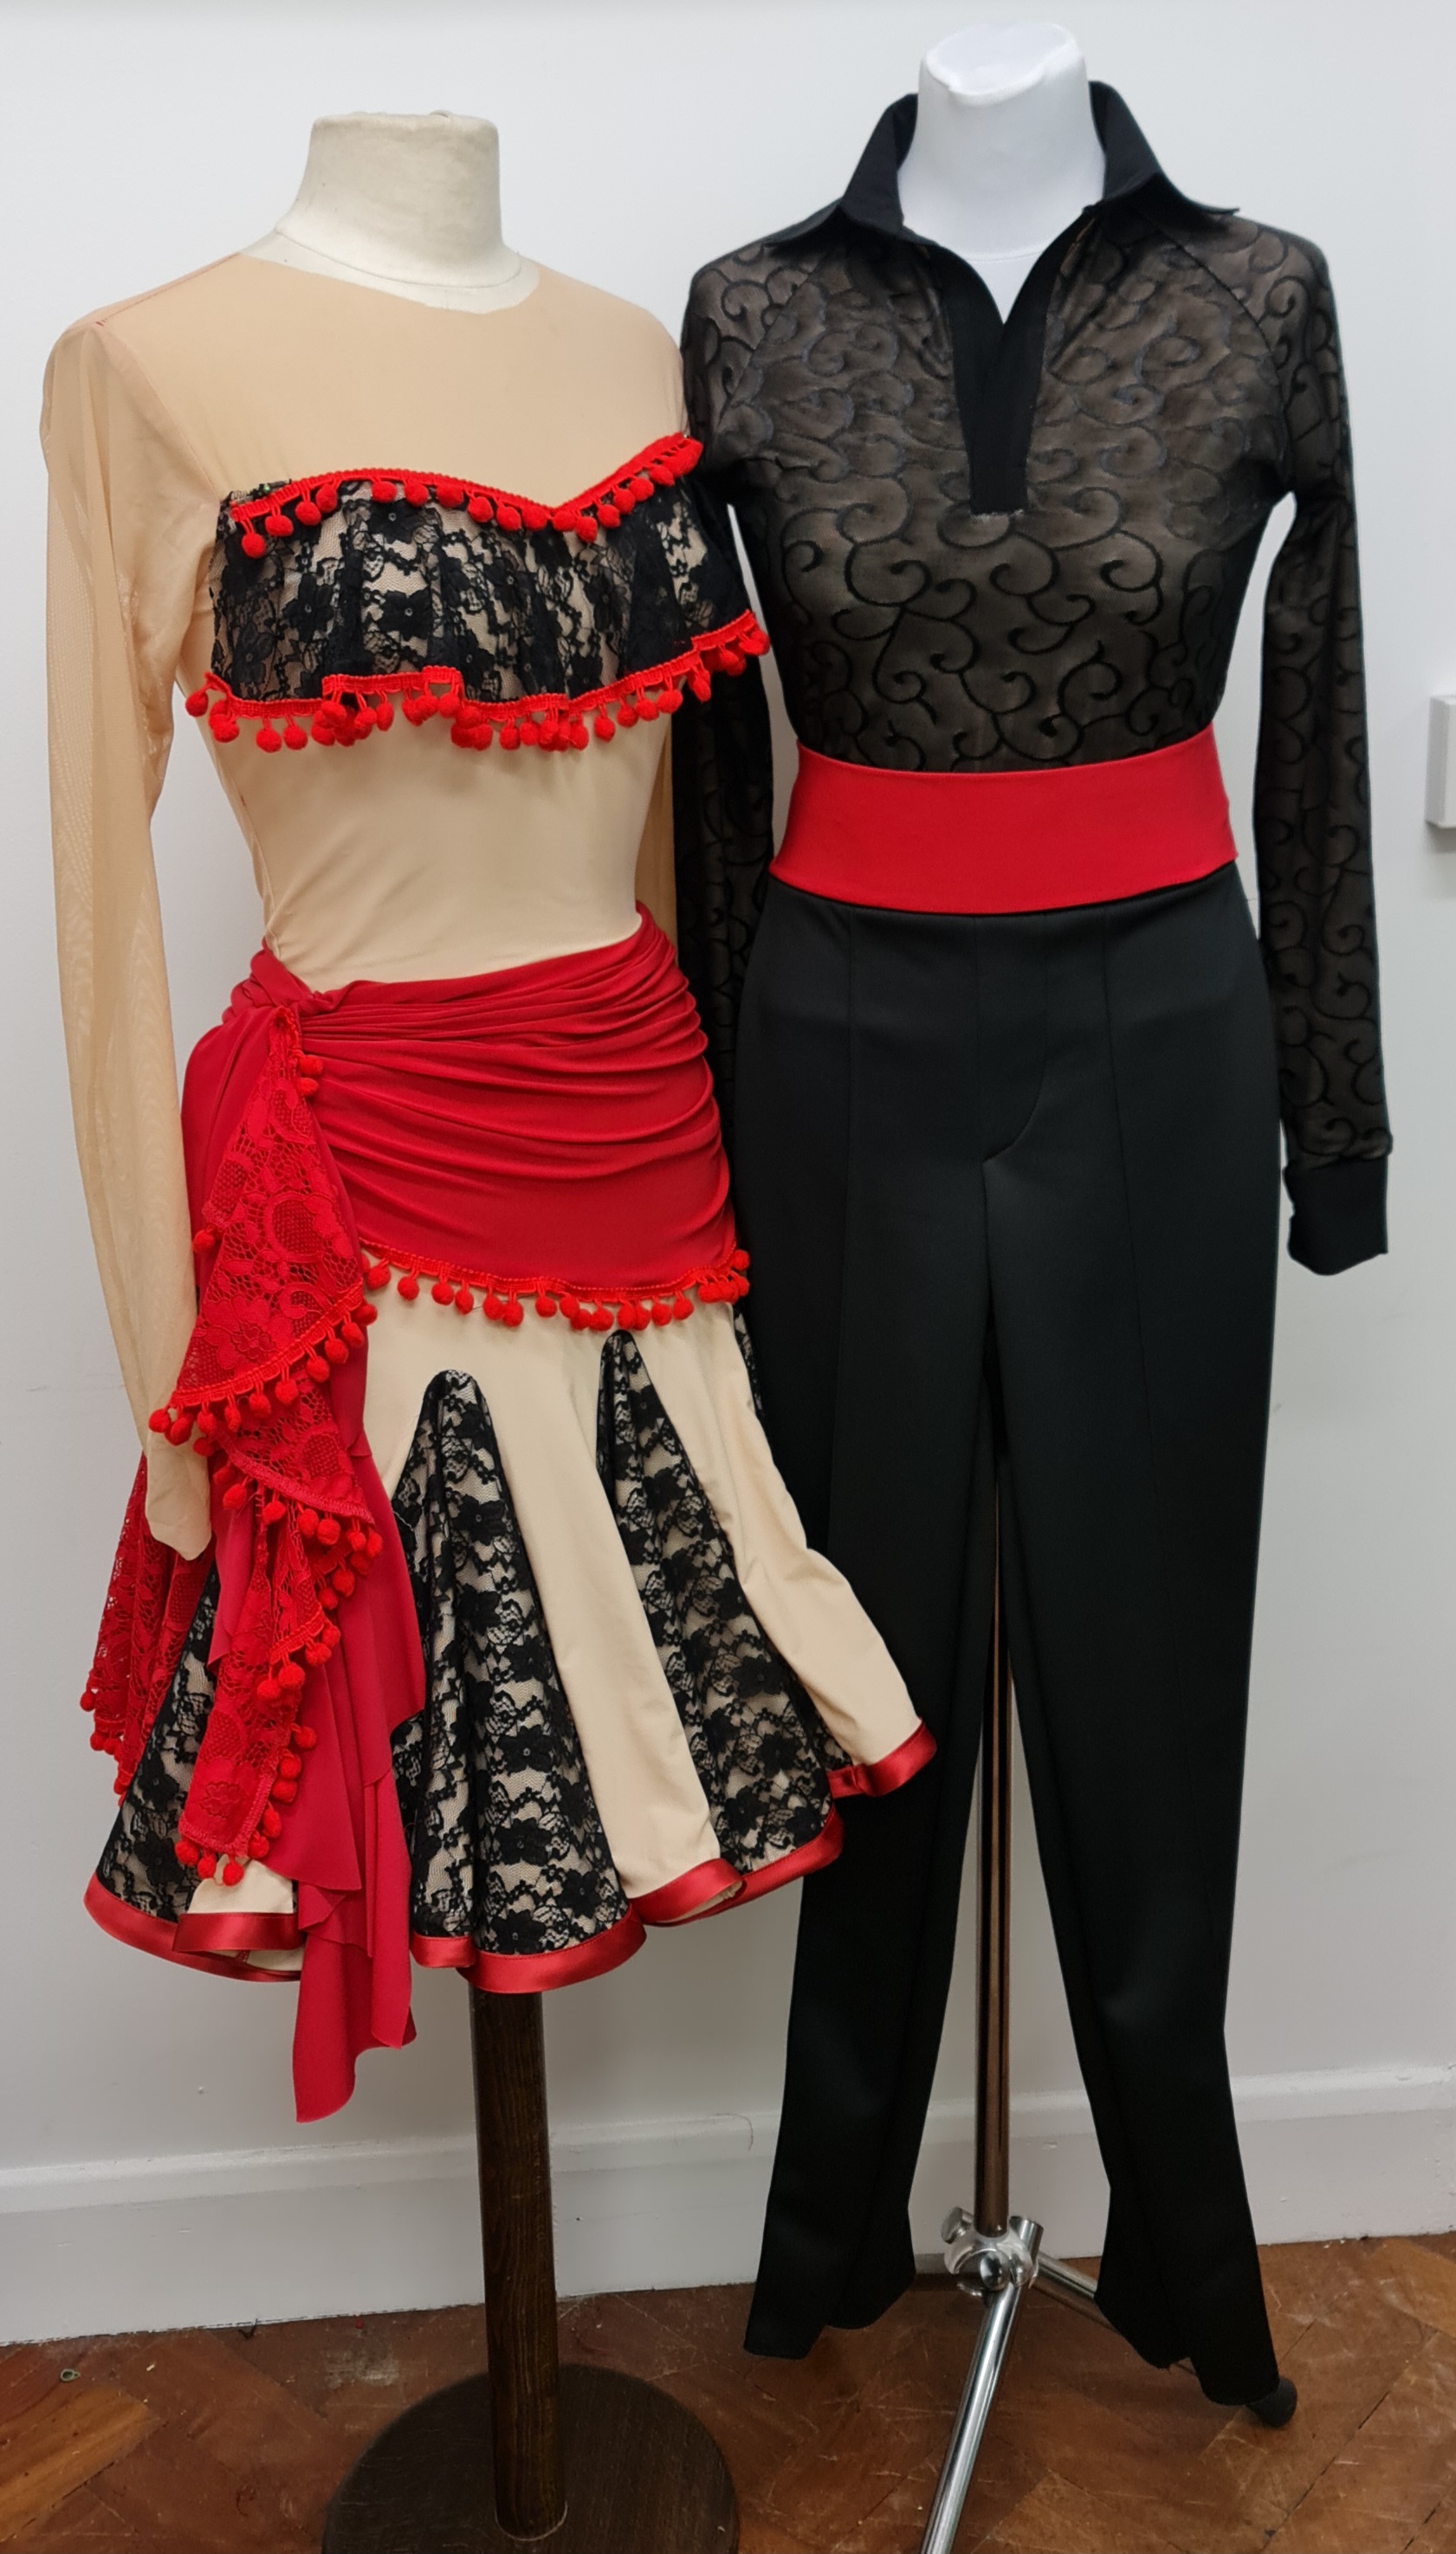 Performance costumes for Moana and partner